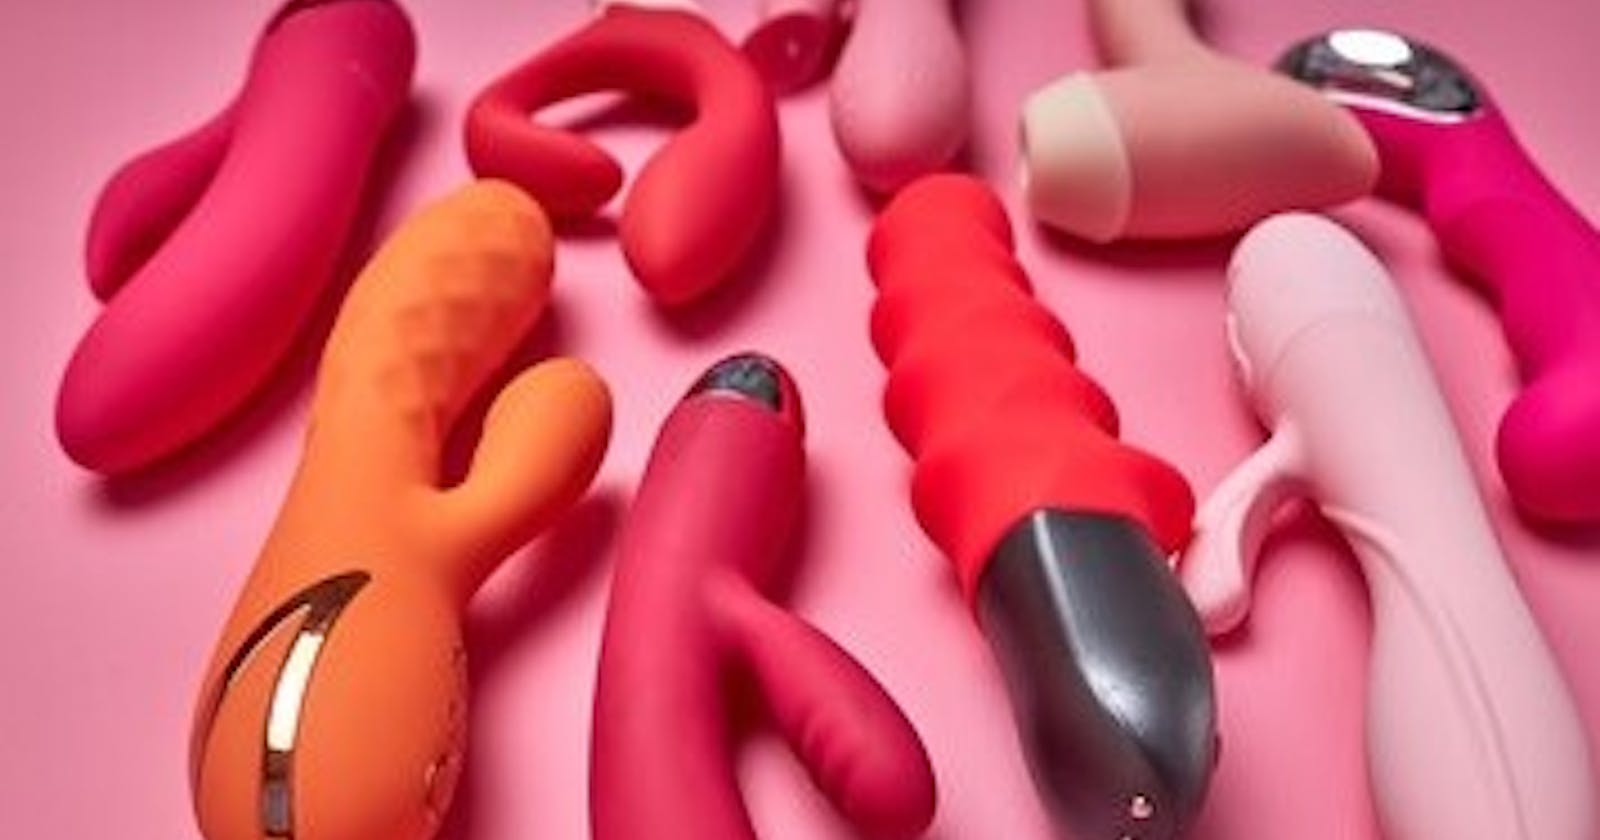 Everything You Need to Know Before Buying A Vibrator